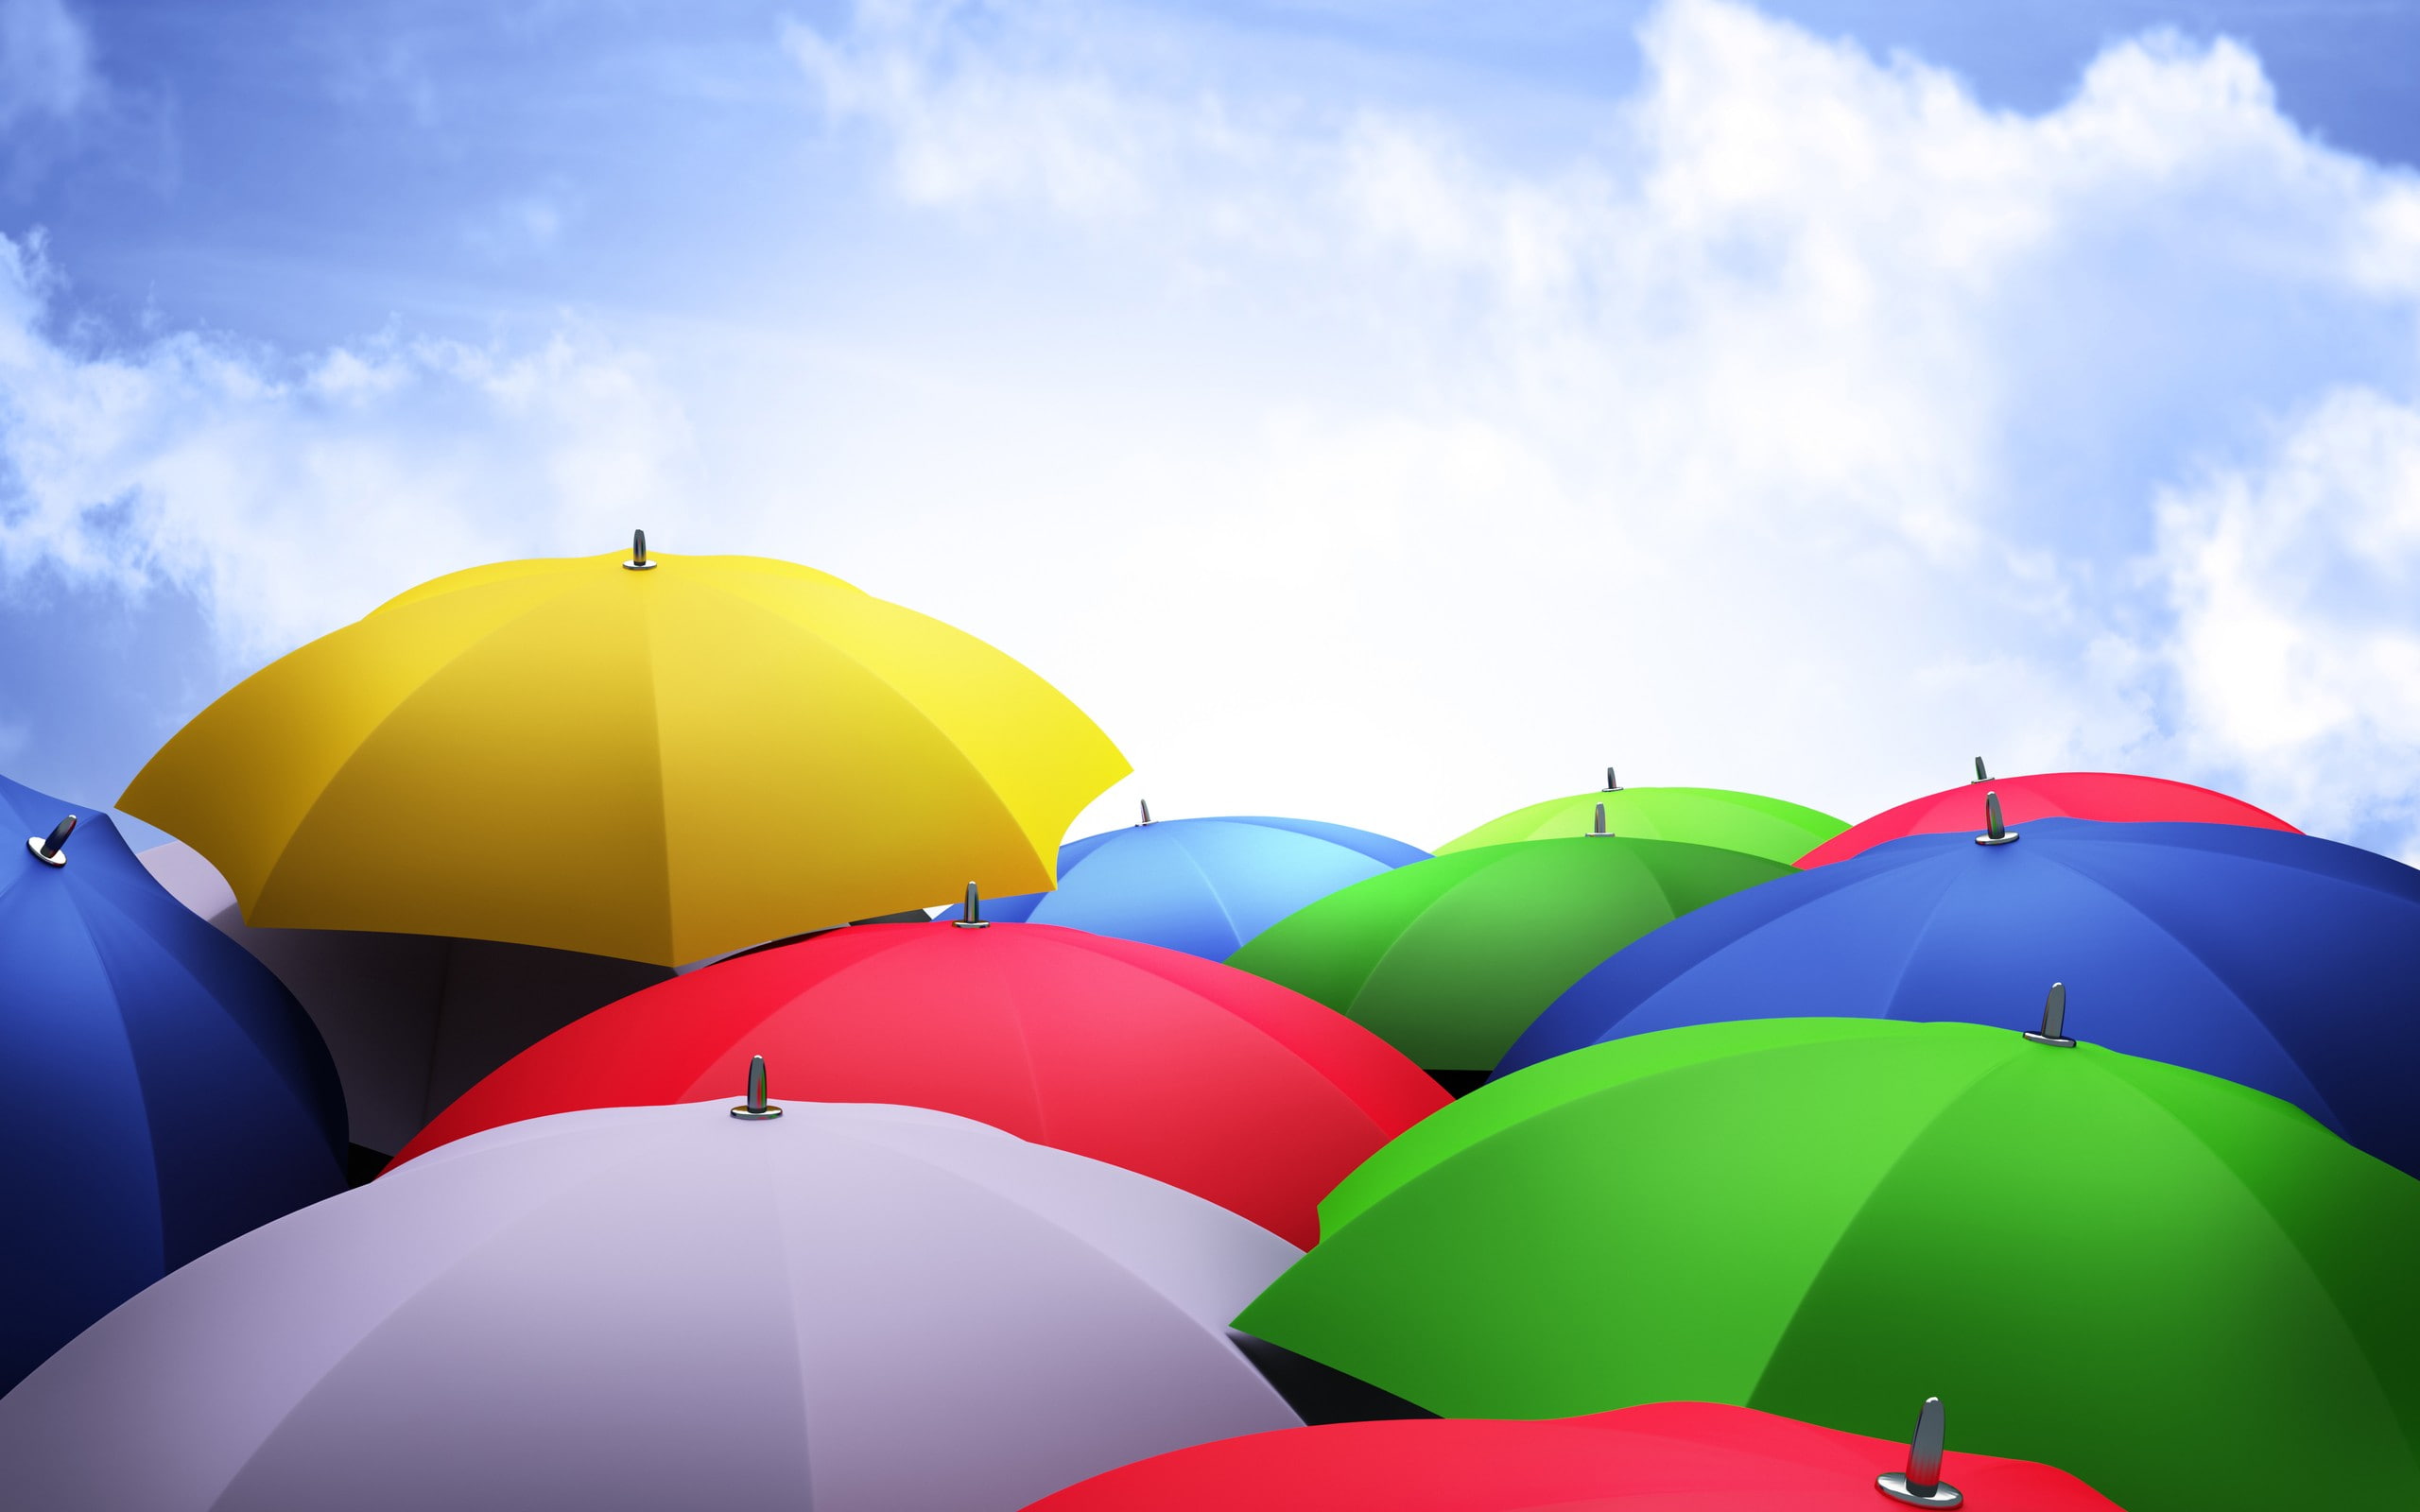 Umbrella HD, yellow, red, green, blue, and white umbrellas, photography